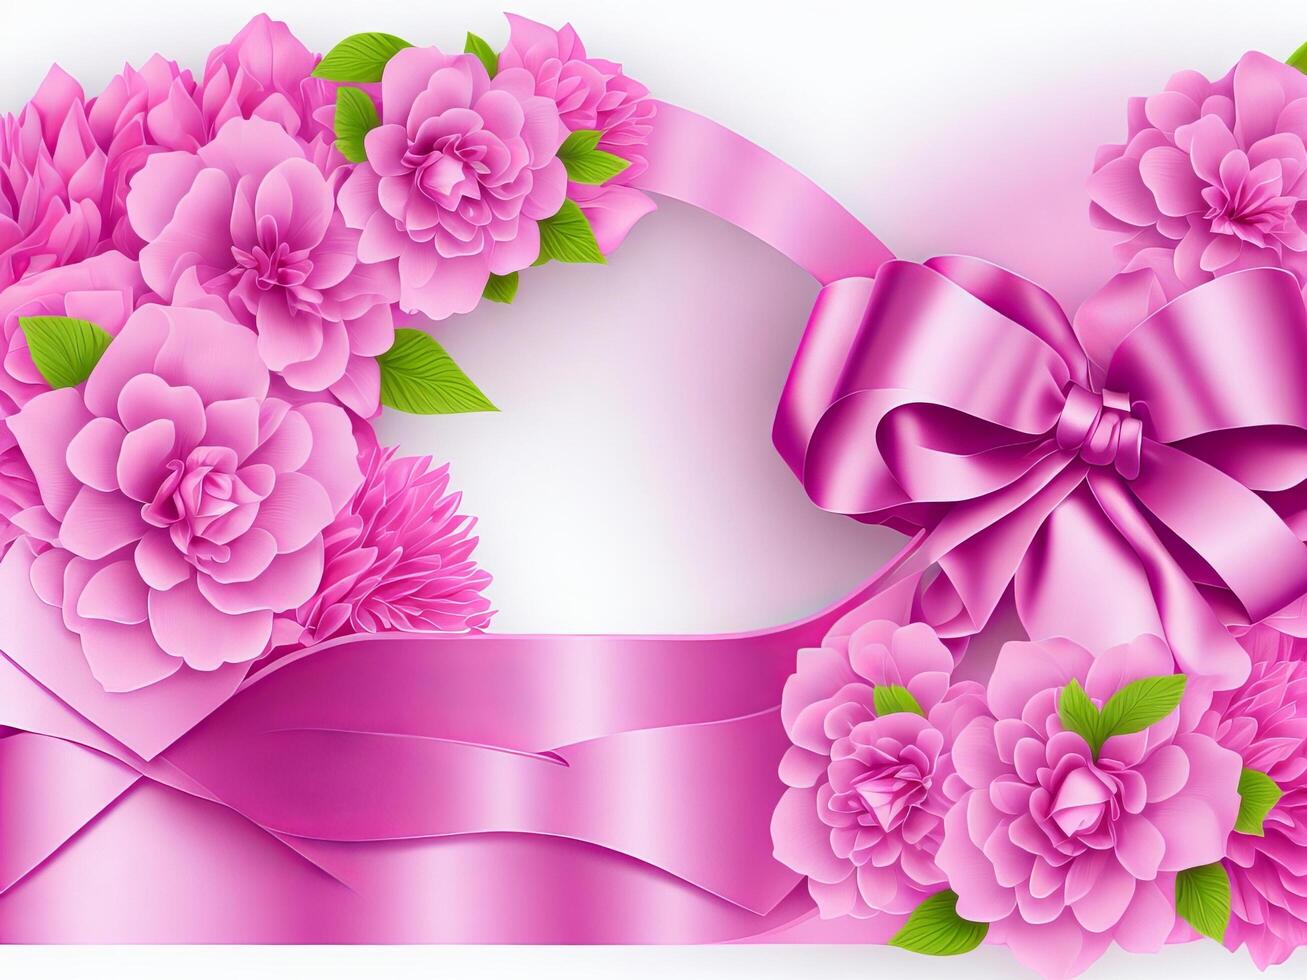 A pink ribbon with a bow on it, photo